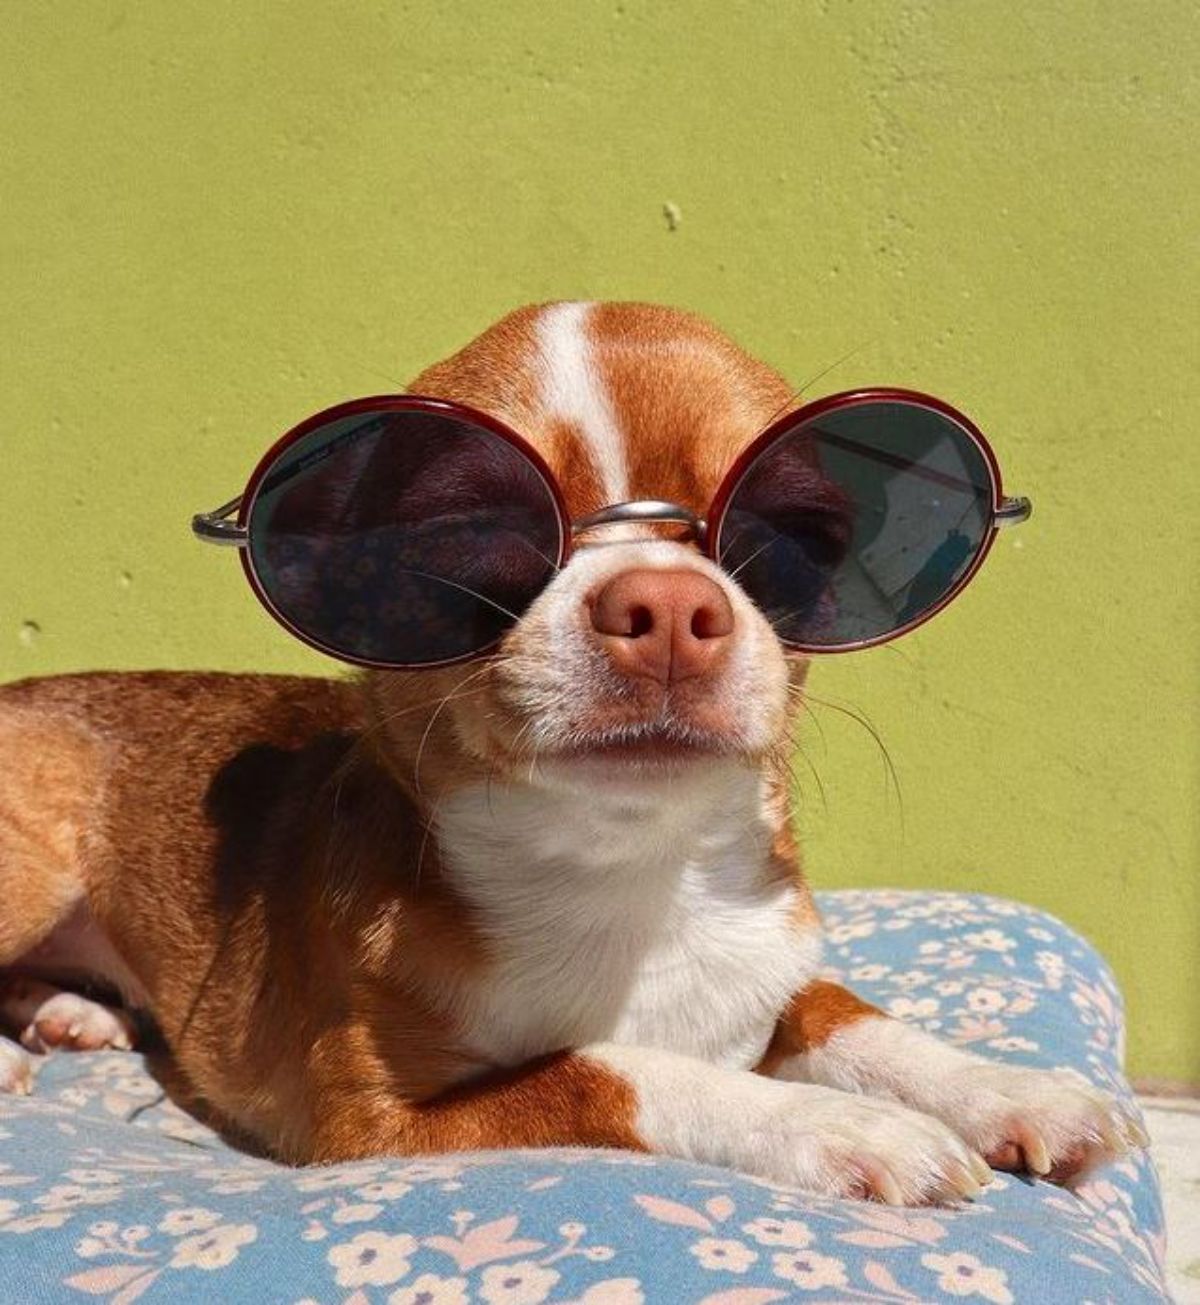 chihuahua lying on its bed wearing sunglasses